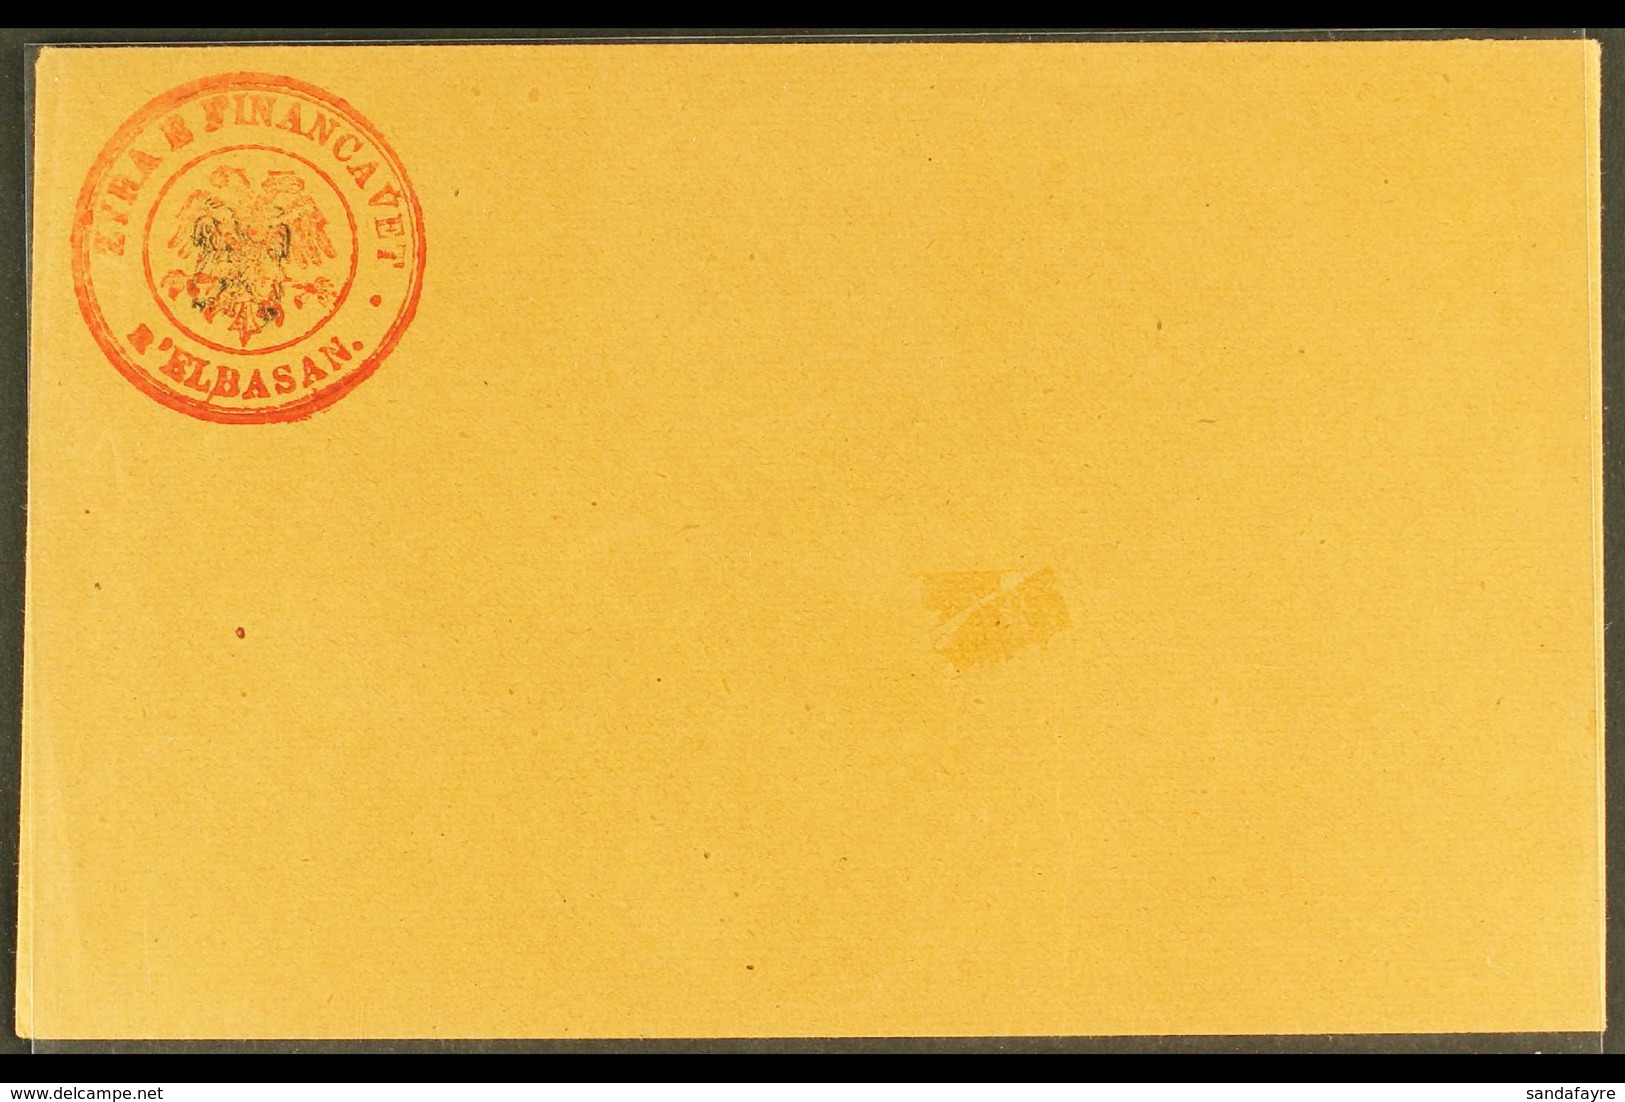 1919 DURRES GOVERNMENT POST. 1919 (1 Gr) Postal Stationery Envelope, Michel U1, Very Fine Unused With Small Mark On Fron - Albania